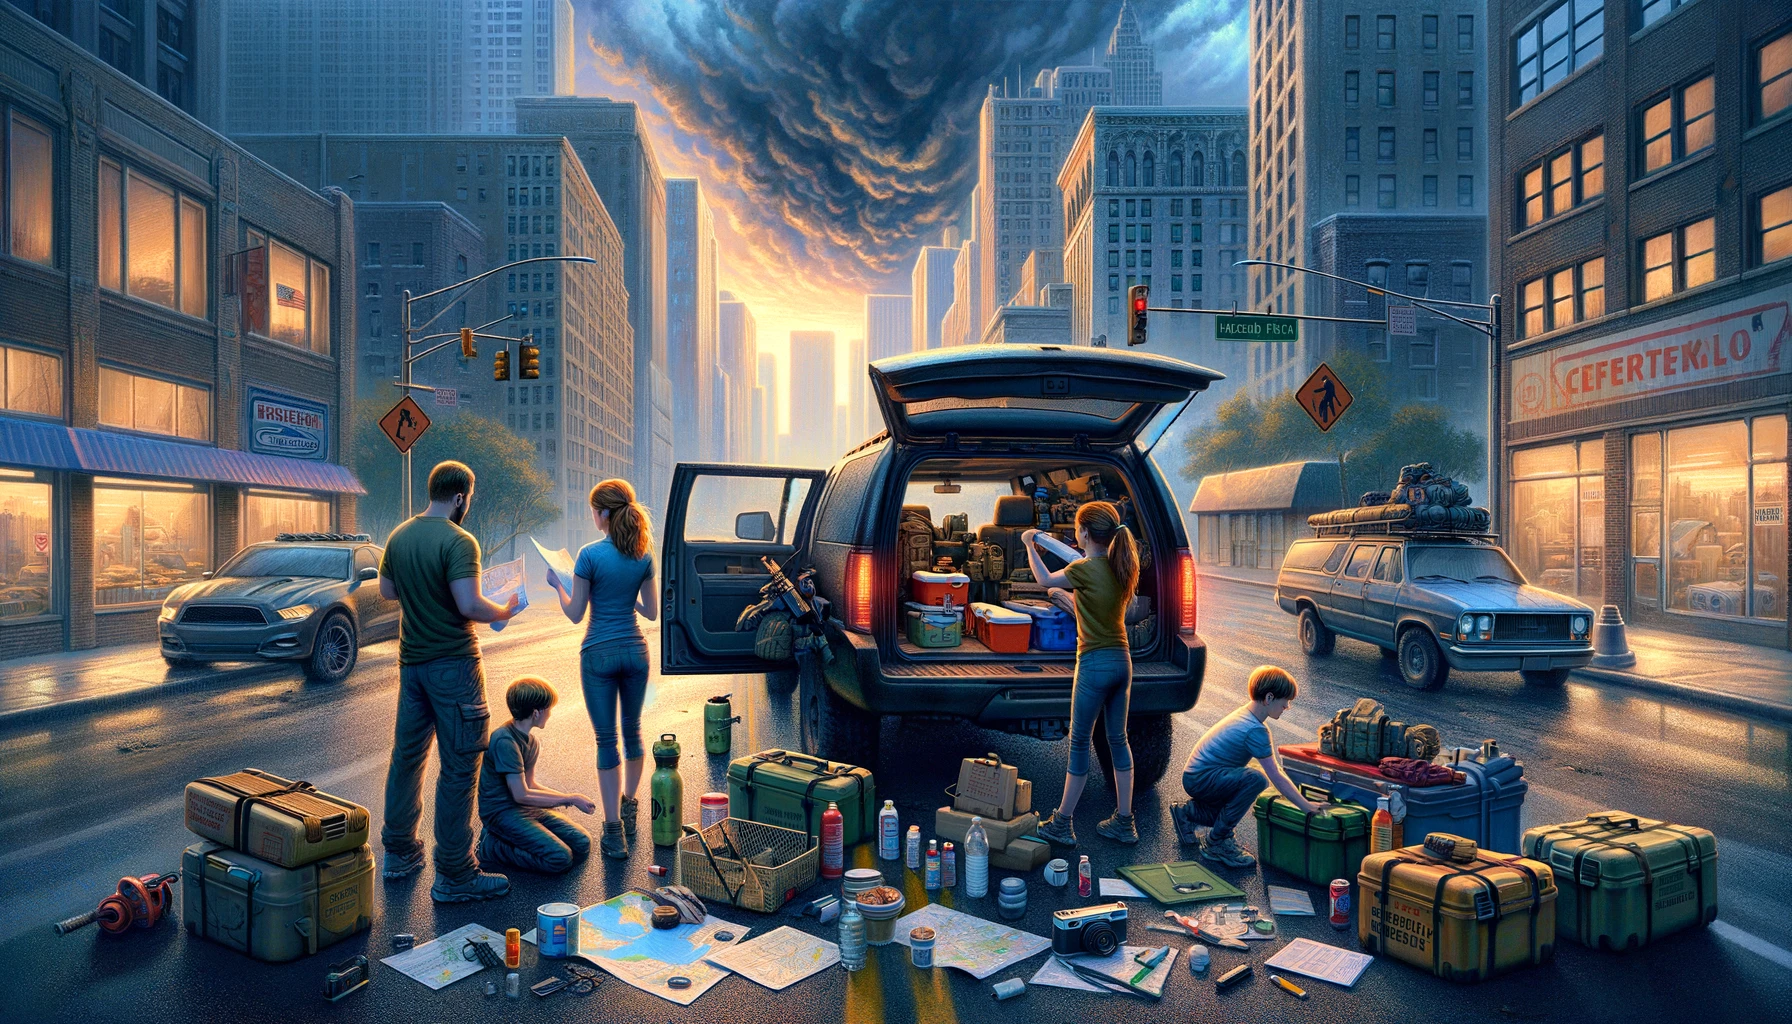 Family of preppers loading essential supplies into a vehicle on a city street, with darkening skies indicating an approaching disaster, emphasizing organized evacuation readiness